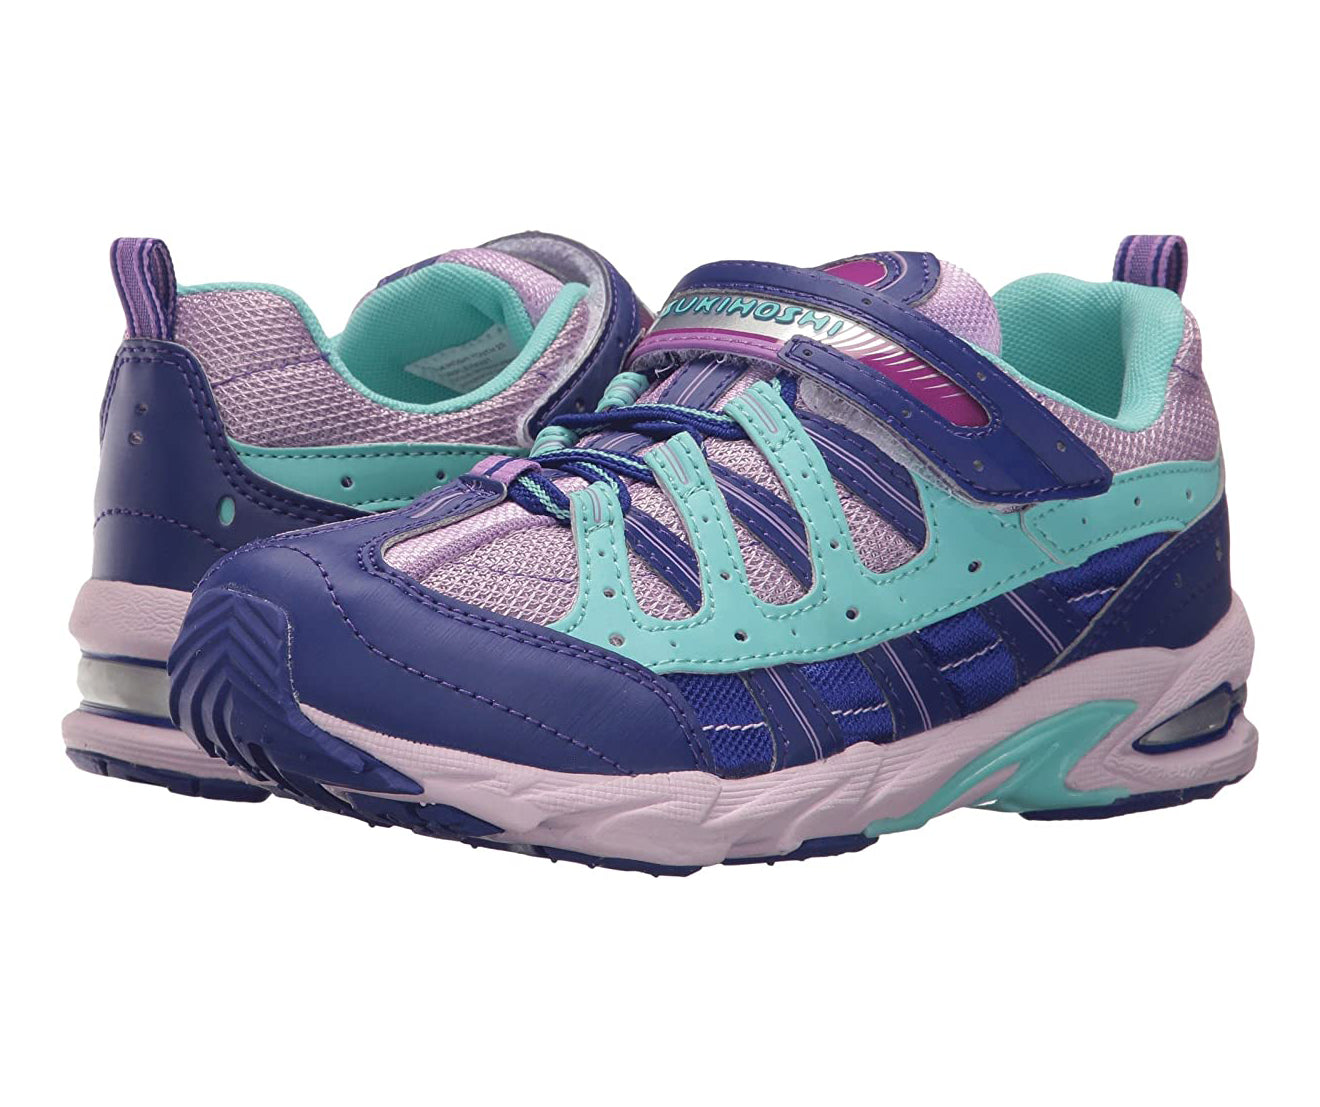 Child Tsukihoshi Speed Sneaker in Purple/Mint from the front view